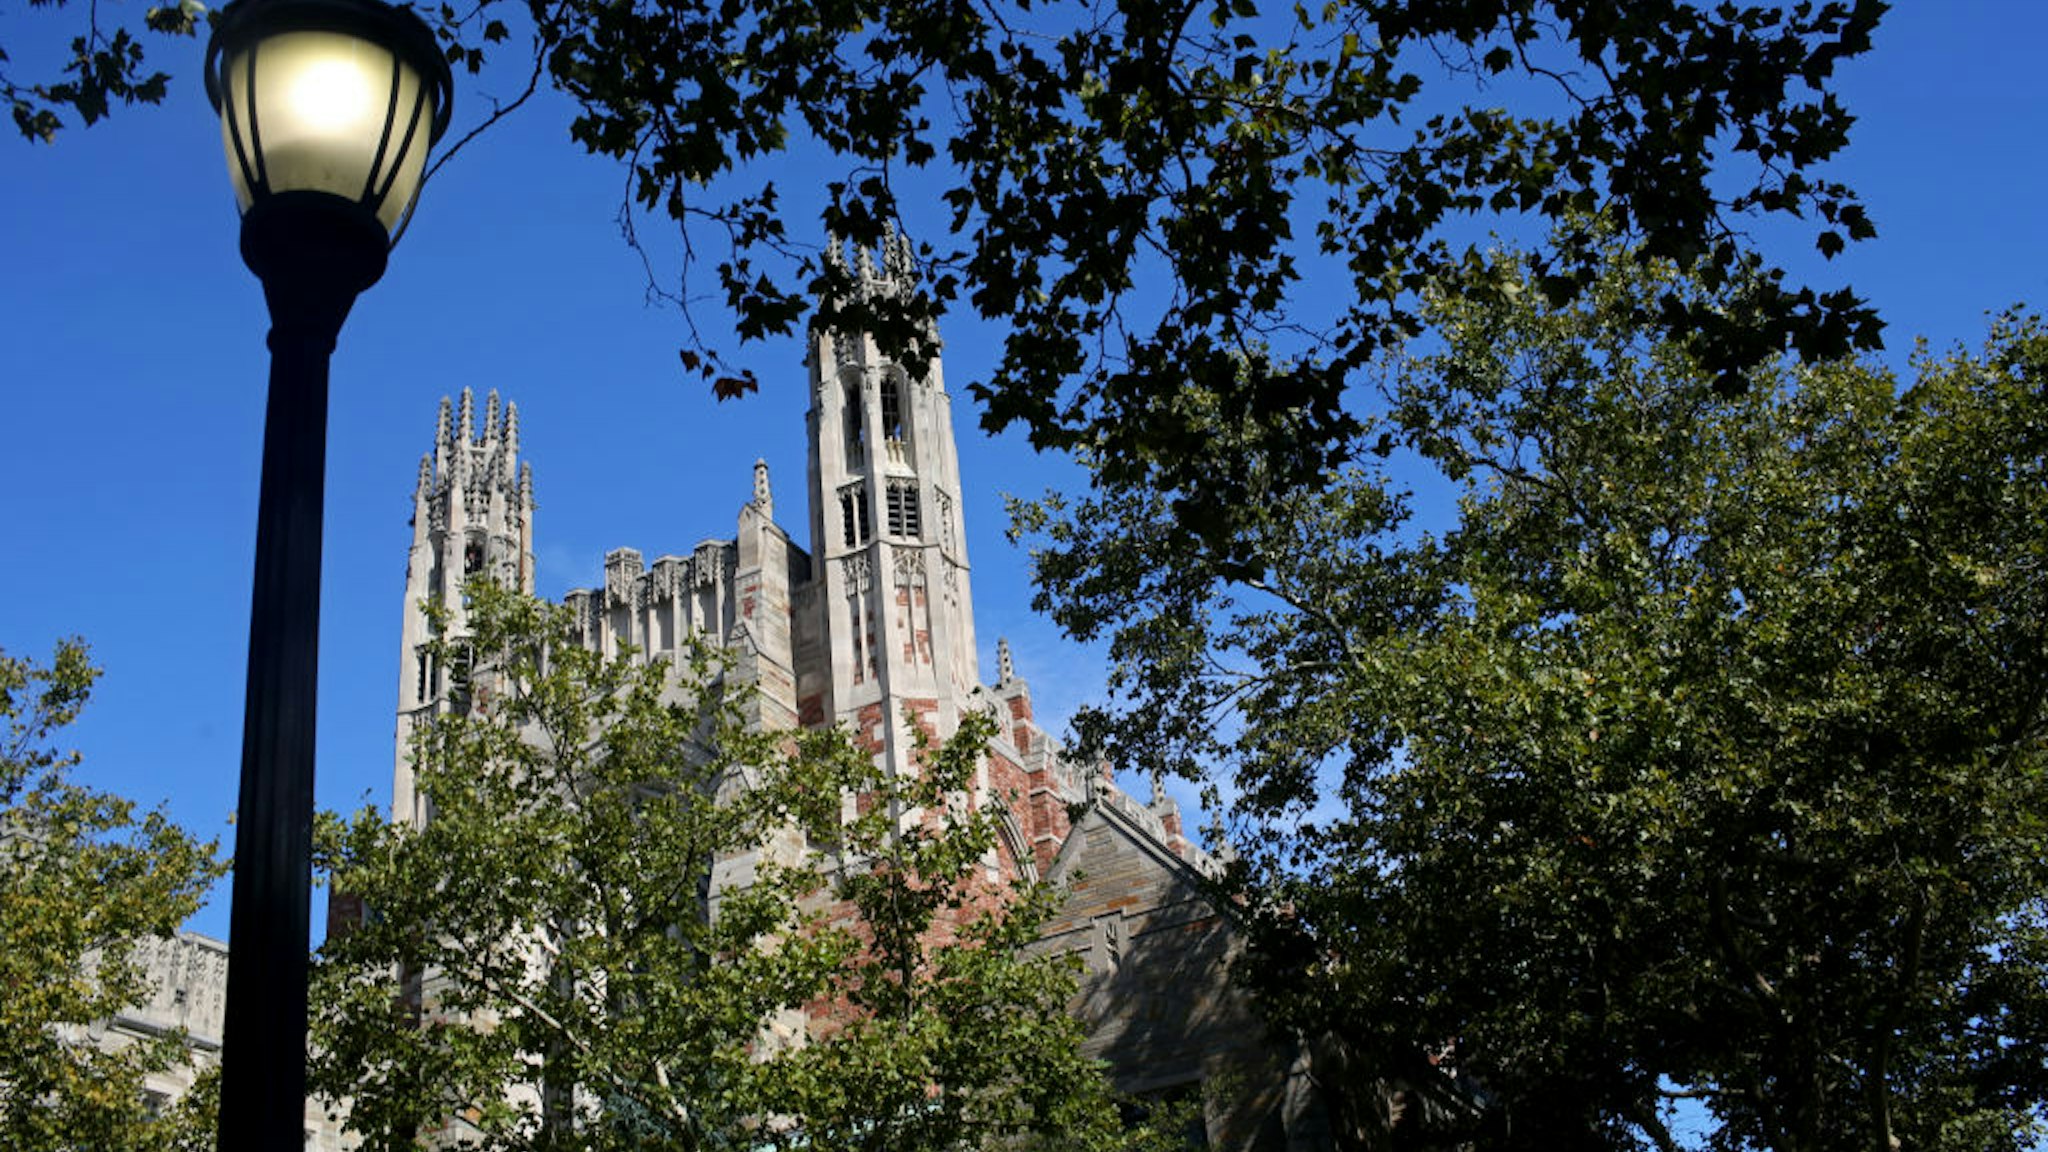 NEW HAVEN, CT - SEPTEMBER 27: Yale University Law School is shown on the day the U.S. Senate Judiciary Committee was holding hearings for testimony from Supreme Court nominee Brett Kavanaugh and Dr. Christine Blasey Ford on September 27, 2018 in New Haven, Connecticut. Blasey Ford, a professor at Palo Alto University and a research psychologist at the Stanford University School of Medicine, has accused Kavanaugh of sexually assaulting her during a party in 1982 when they were high school students in suburban Maryland. (Photo by Yana Paskova/Getty Images)